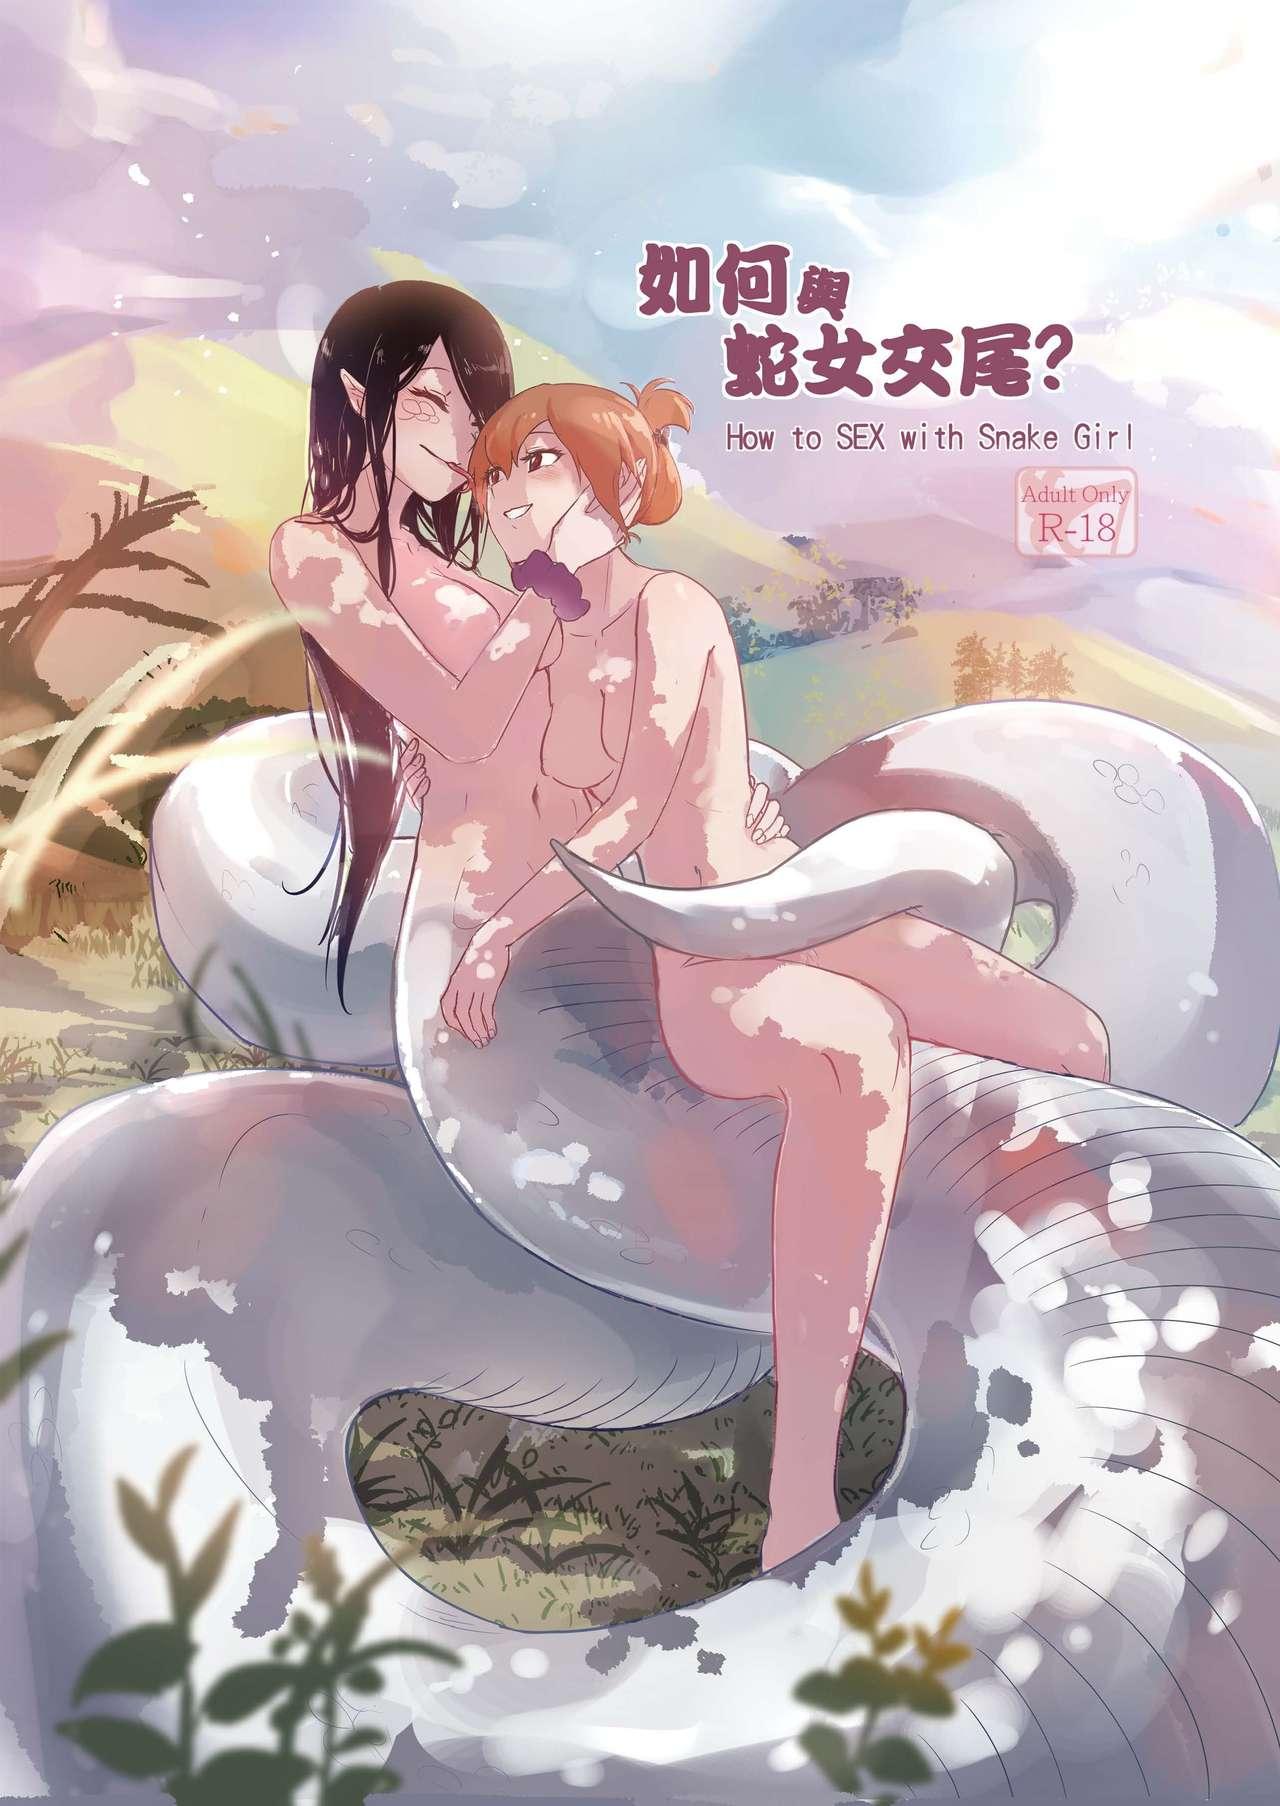 Reversecowgirl How to Sex with Snake Girl | 如何與蛇女交尾 | 蛇女と交尾する方法は - Original Gay Blowjob - Page 1